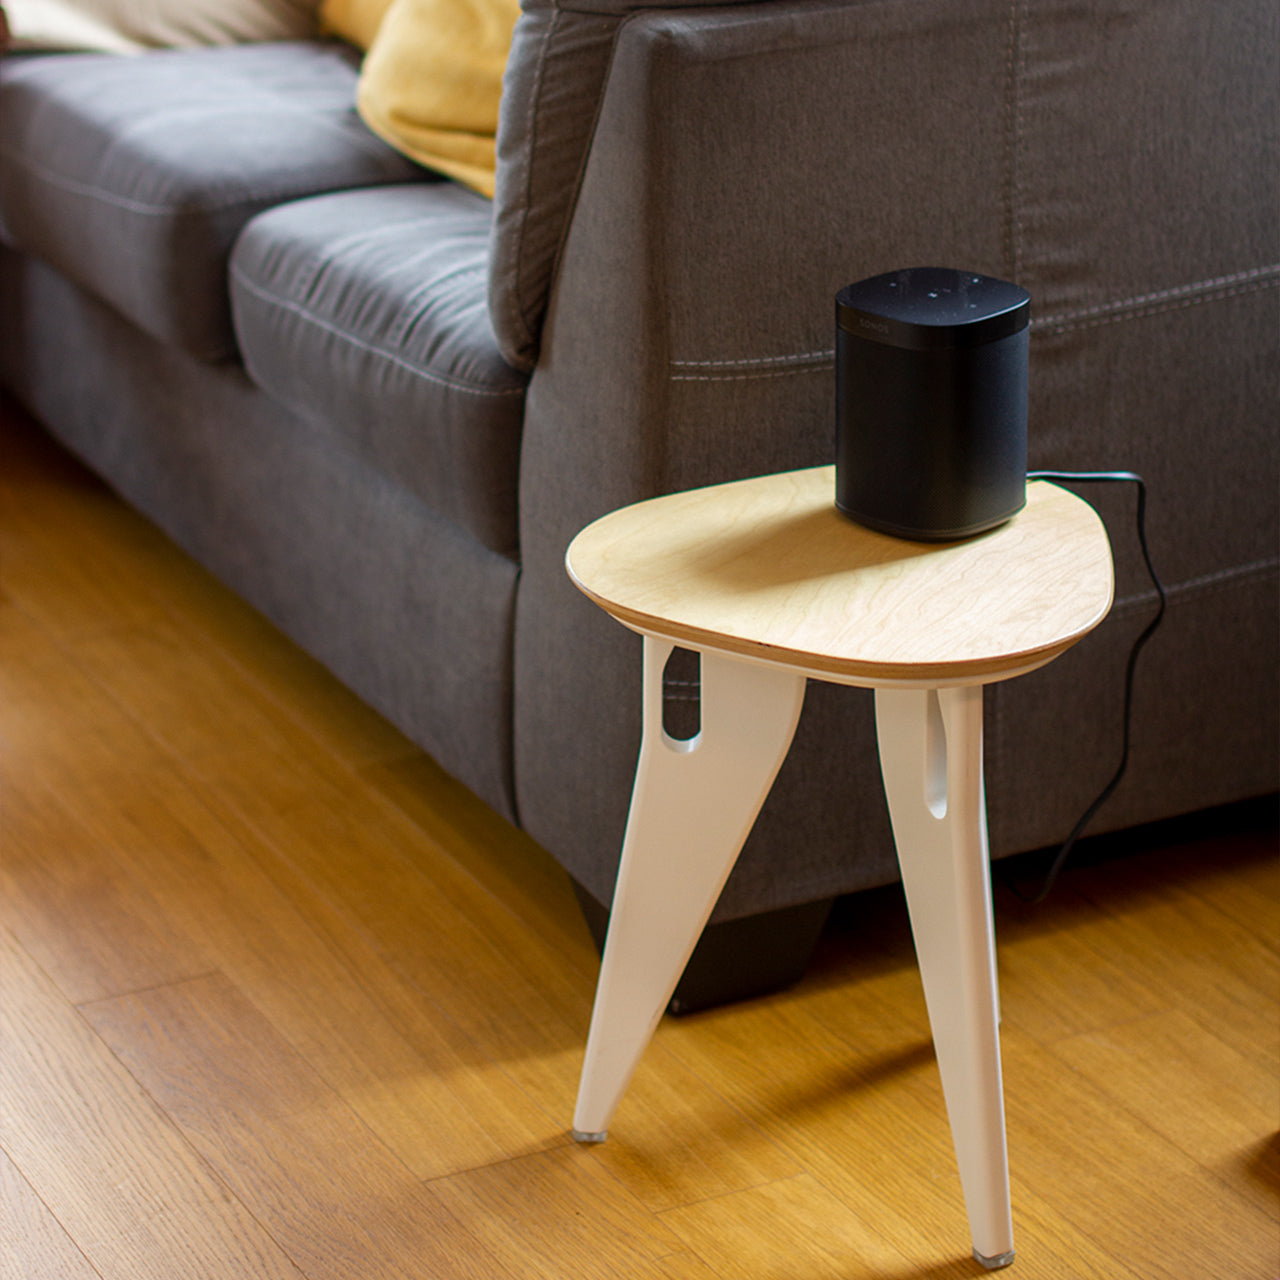 The Side Table / Stool